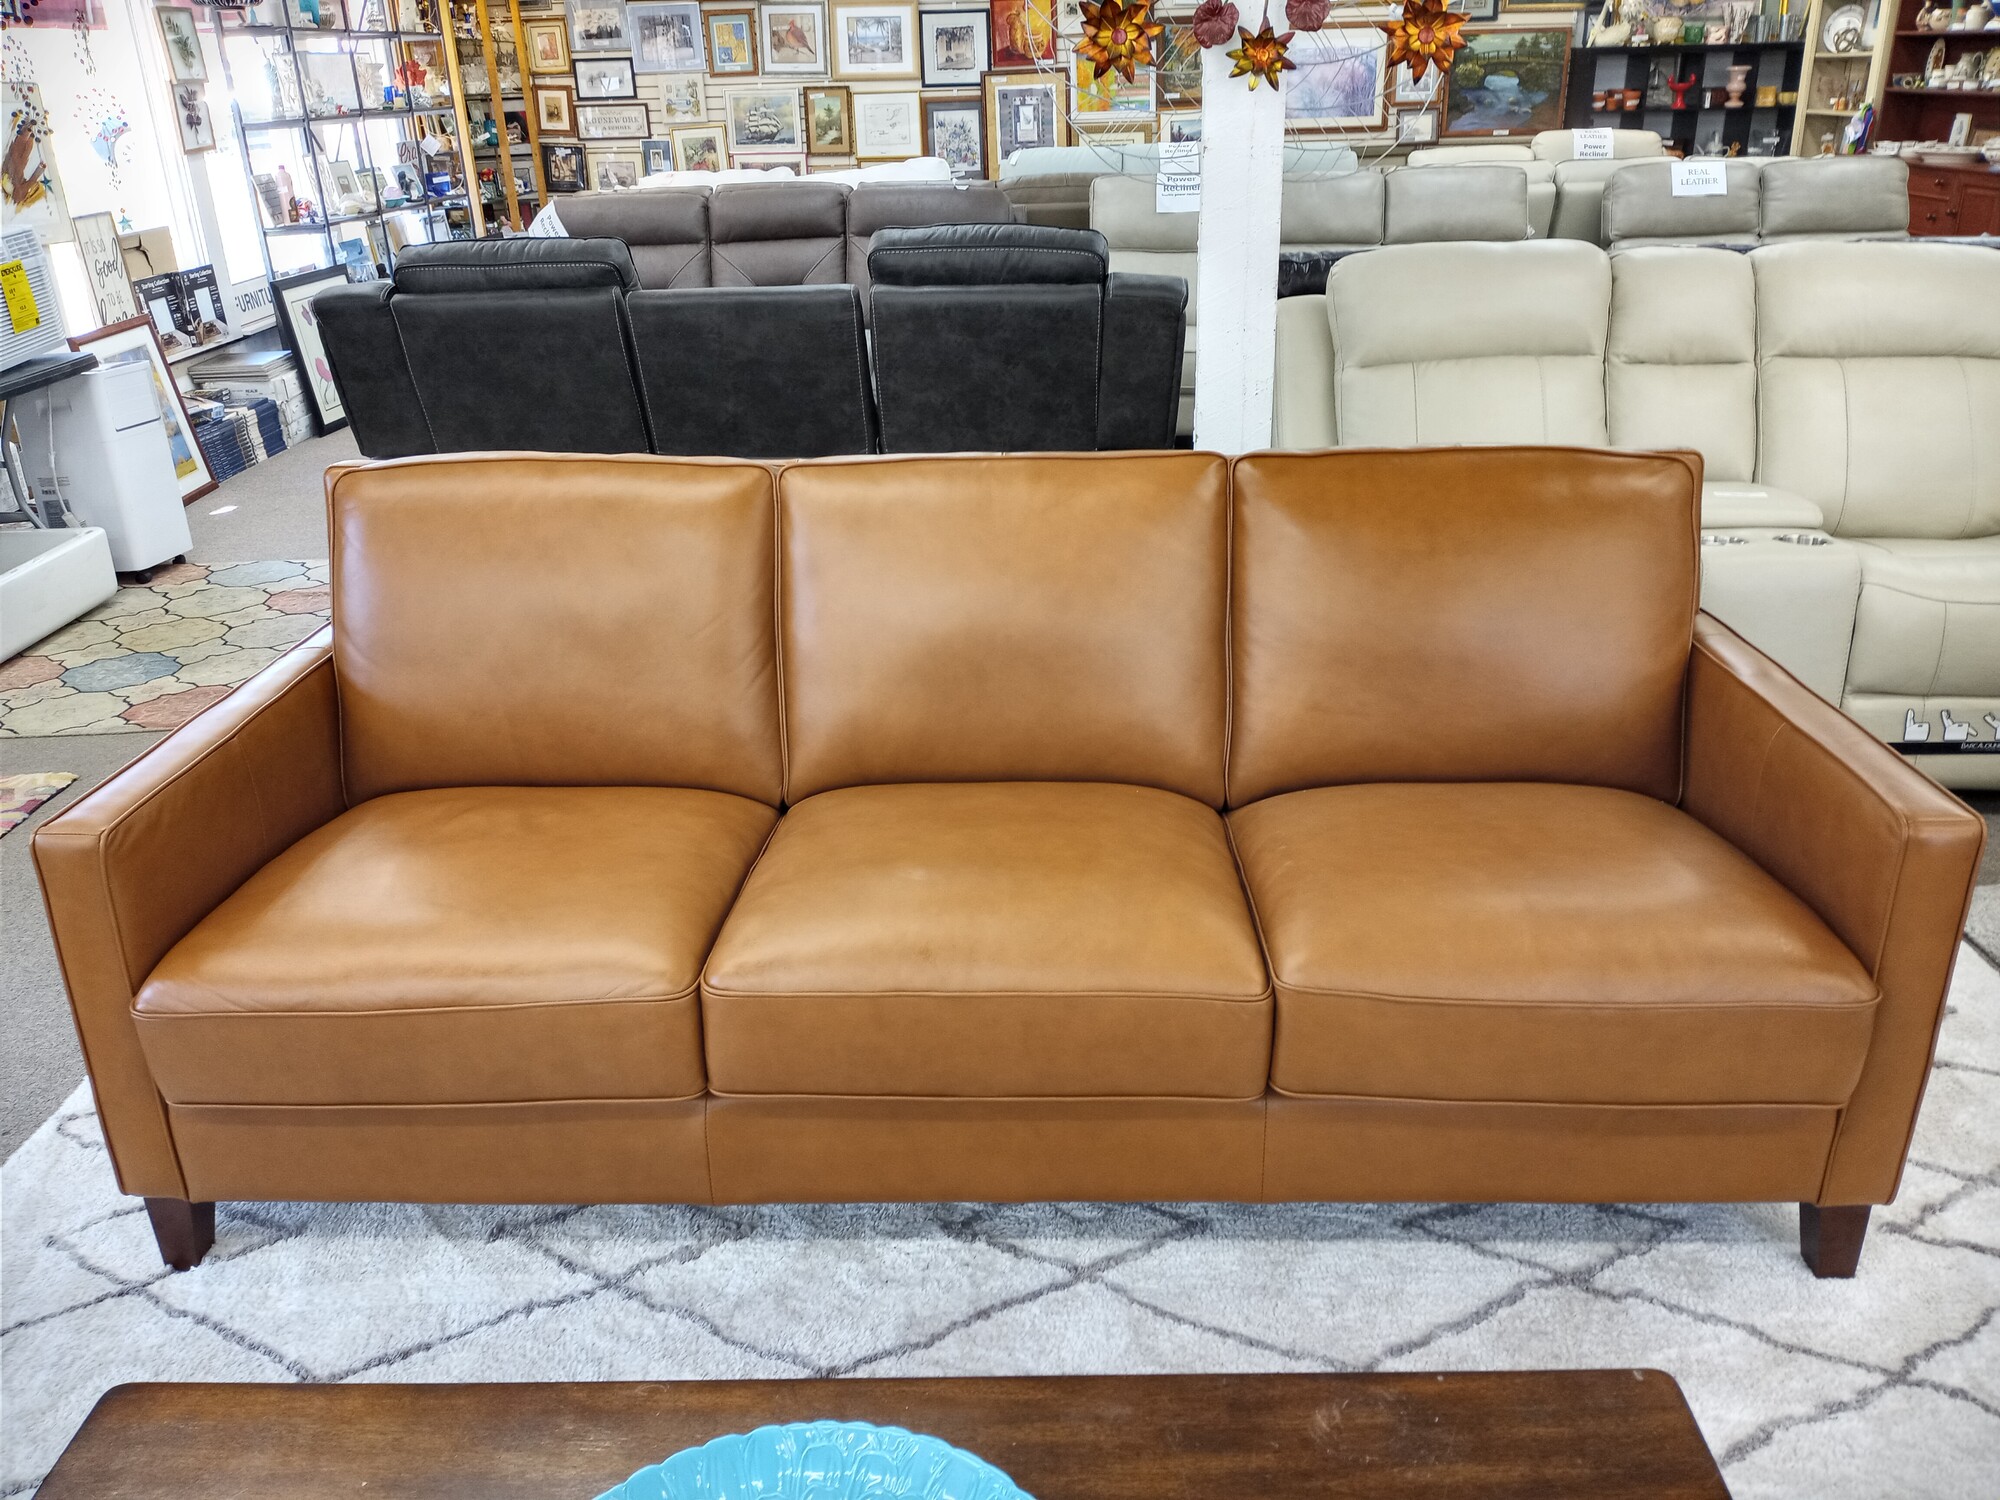 Cognac Nice Leather Sofa
    Color: Cognac Brown or Taupe Tan
    Top Grain Leather on all seating areas and arms rests with split grain leather on the front rail, sides and back
    Kiln-dried solid wood frame
    L-braced hardwood frames and glued corners
    Removable seat cushions composed of 2.25 lbs density foam core.  Cushions are double-wrapped with down feathers.
    No-sag spring platform to ensure support and comfort
    Back cushions feature bagged and channeled polyester fiber to maintain its shape
    Back cushions are not removable
    Padded outside arms and backs
    Solid wood legs in Dark Brown finish 5” H
    Leather care: Position your leather furniture away from direct sunlight, high-wattage lights, heating and air conditioning registers. These remove necessary moisture from leather that may cause cracks or splits. Gently wipe your leather once a week with a clean dry or slightly damp soft cloth to avoid build-up of dirt and dust. Avoid using chemical cleaners which are harmful. Clean up spills immediately using a soft cloth. Dab with a slightly damp cloth and dry the area immediately with a clean white towel.
    Seat cushion depth is 22”
    Seat cushions are 9” thick
    Seat height dimensions are 26”W x 20”H
    Arm height is 25.5”
    Arm width is 4”

Sofa Dimensions:

    85.5” W x 38” D x 35” H